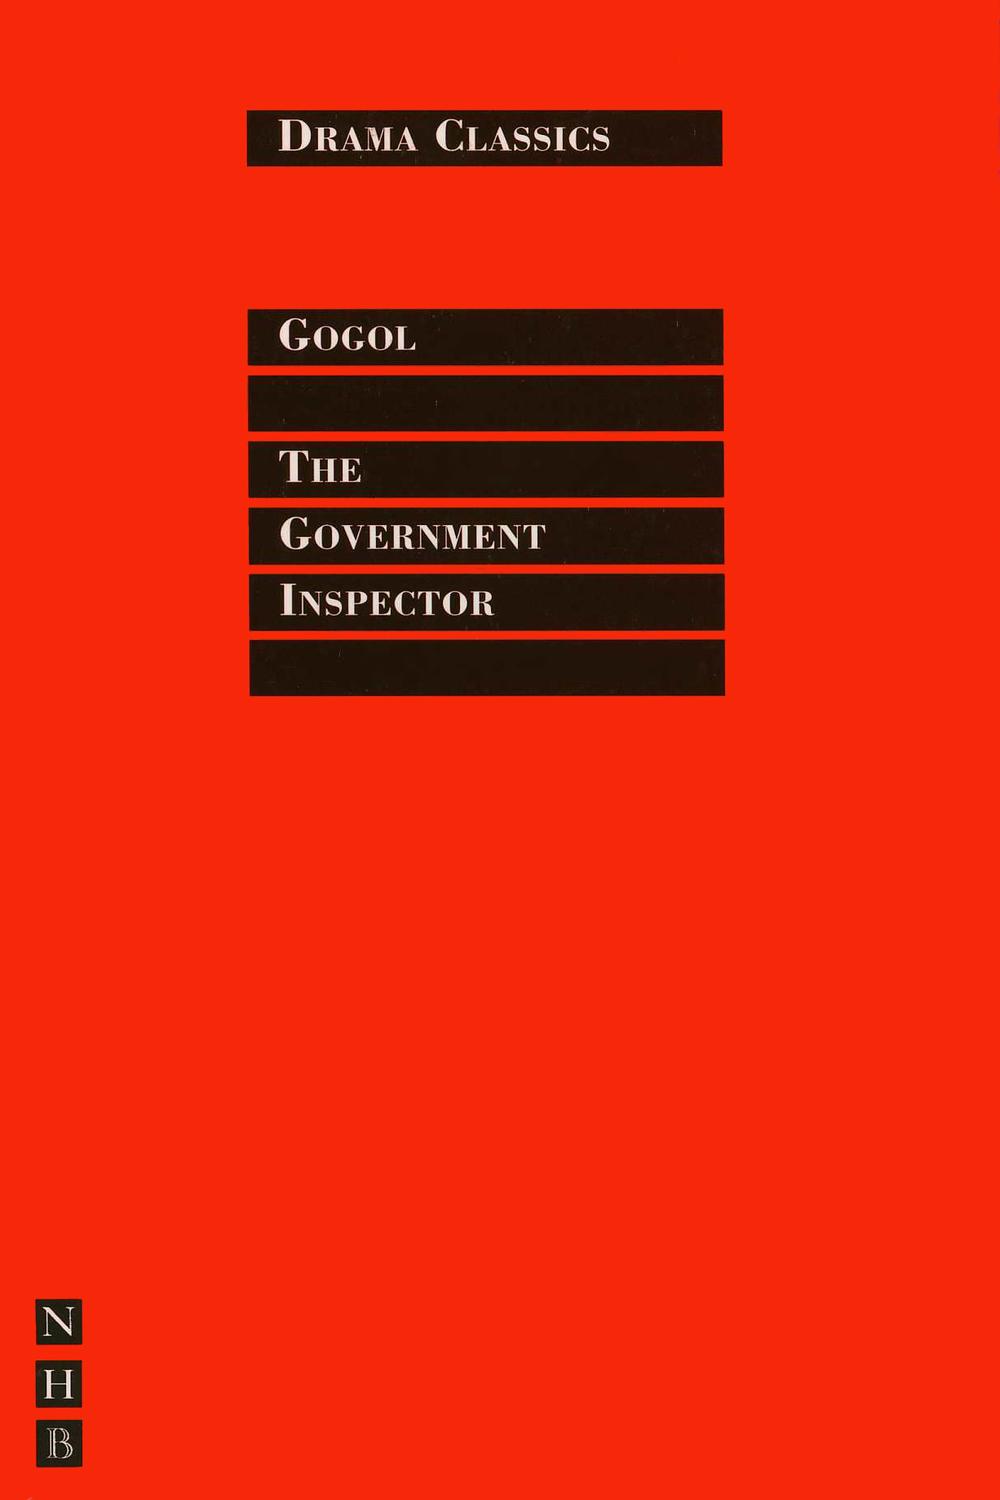 The Government Inspector: Full Text and Introduction (NHB Drama Classics) - Nikolai Gogol